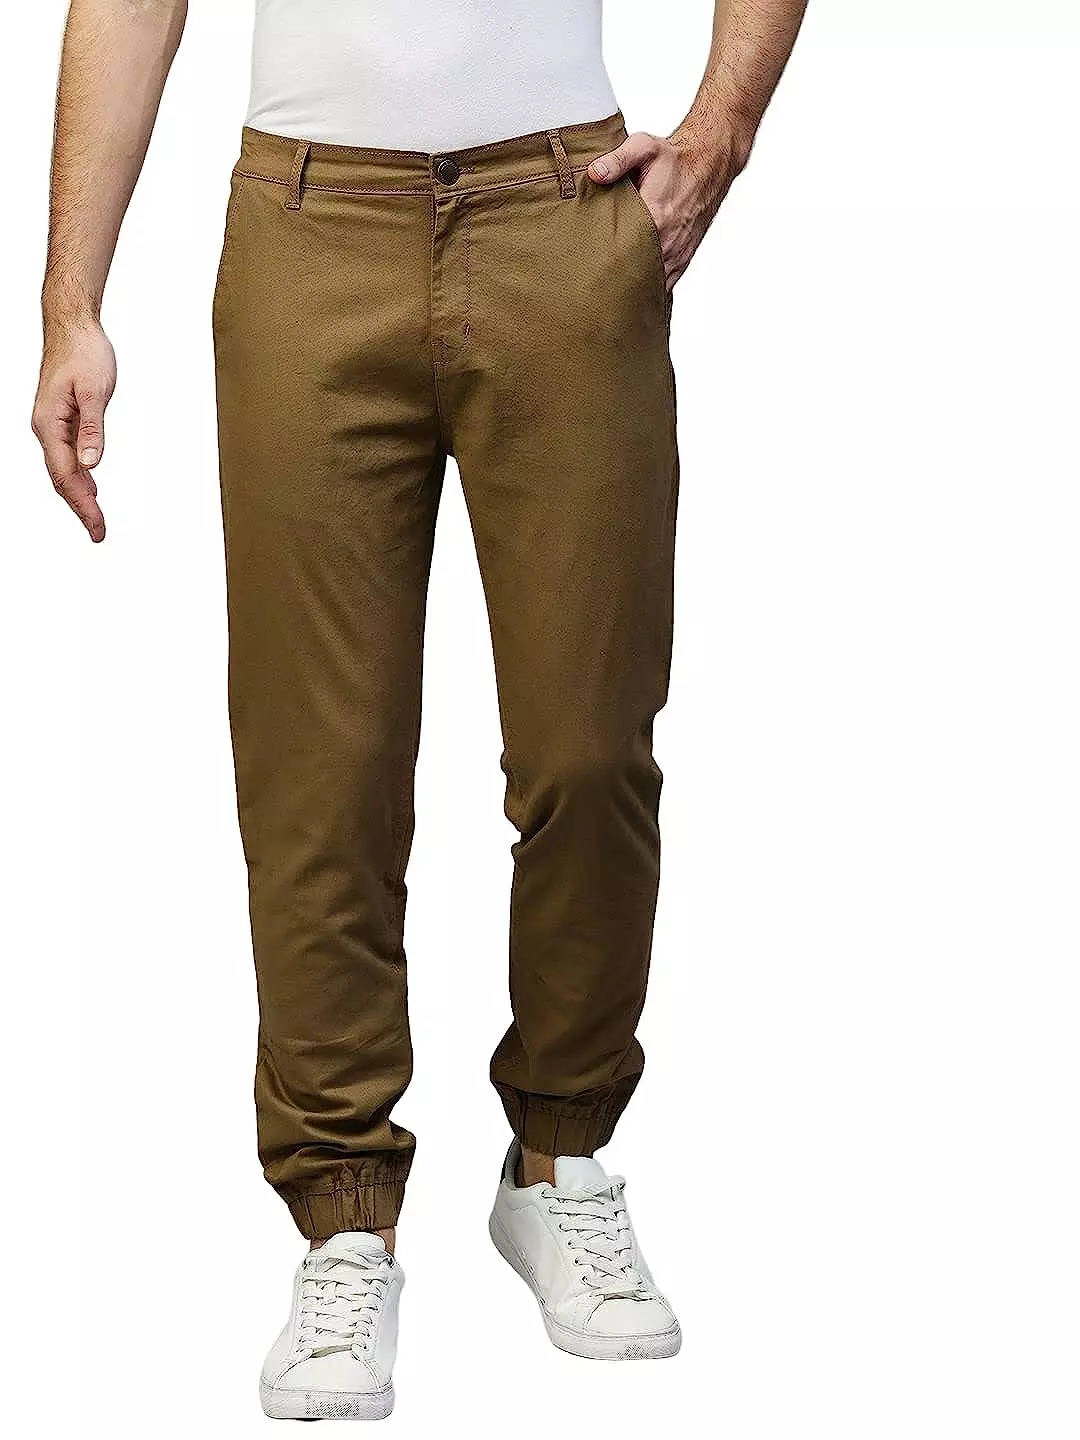 Buy Big Pocket Trousers Online In India -  India